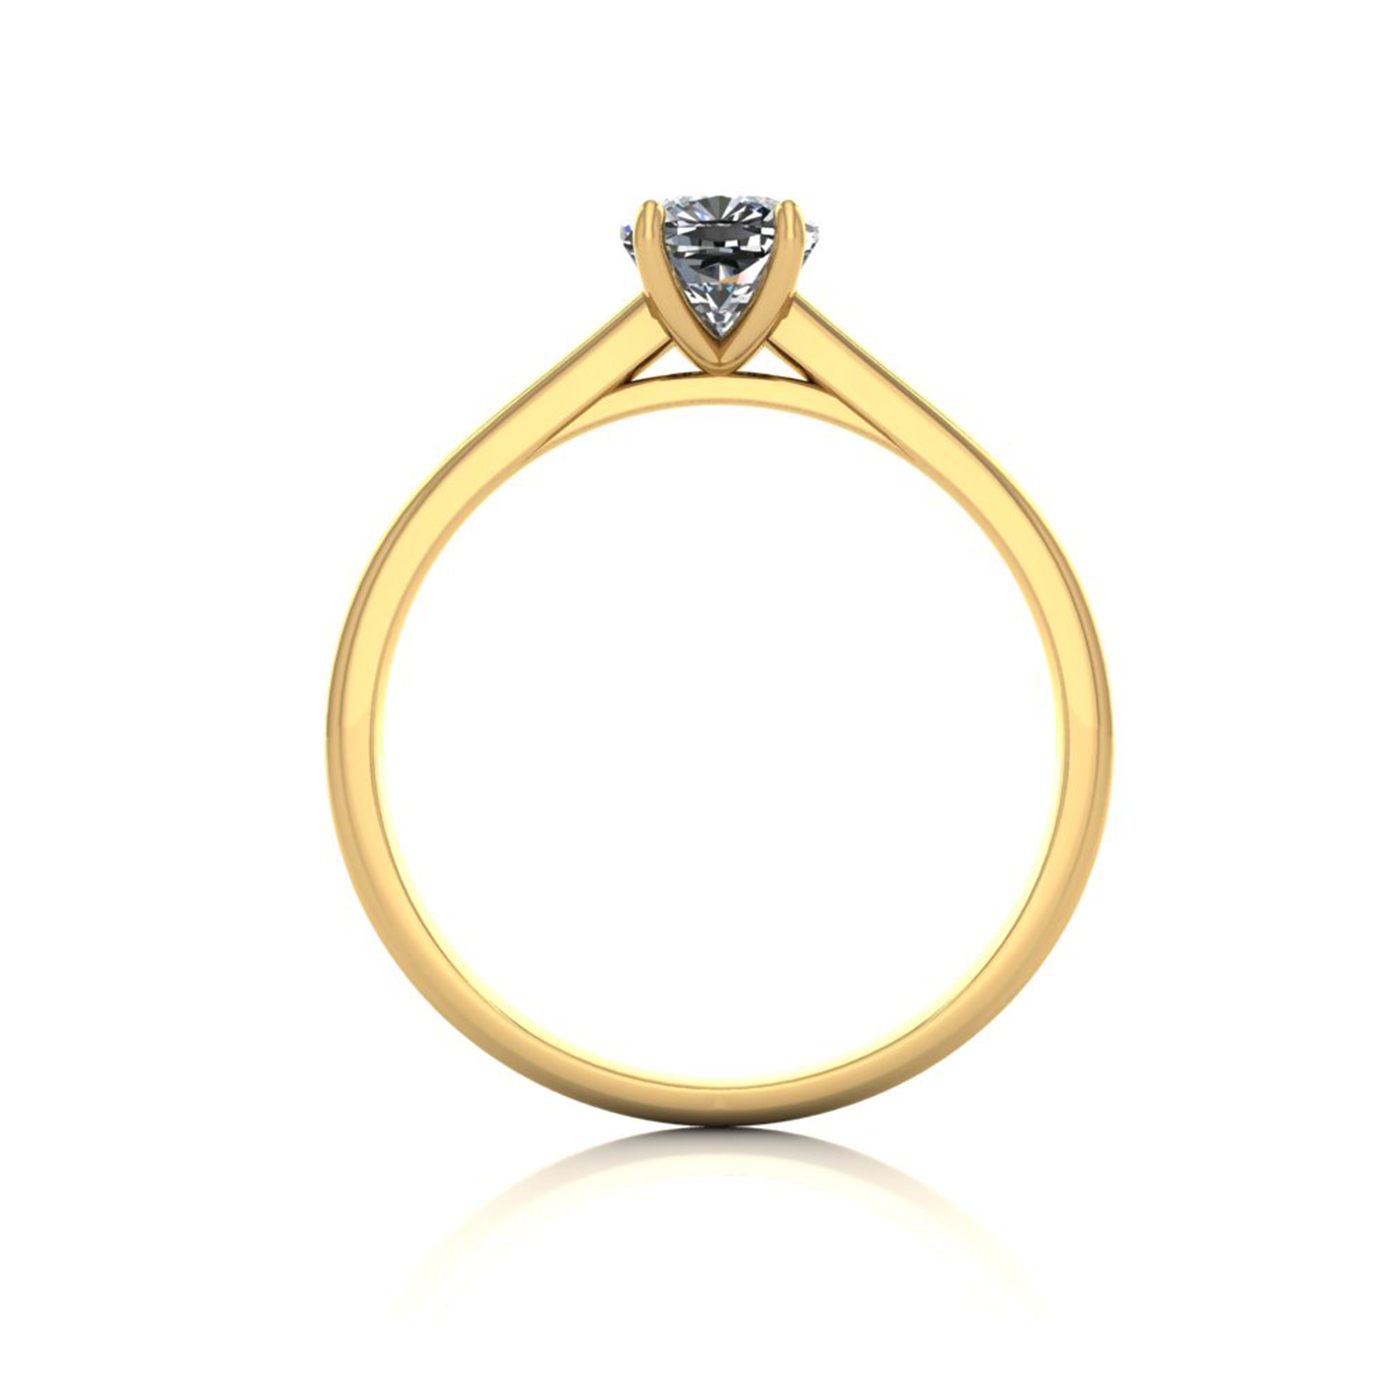 18k yellow gold 0,80 ct 4 prongs solitaire cushion cut diamond engagement ring with whisper thin band